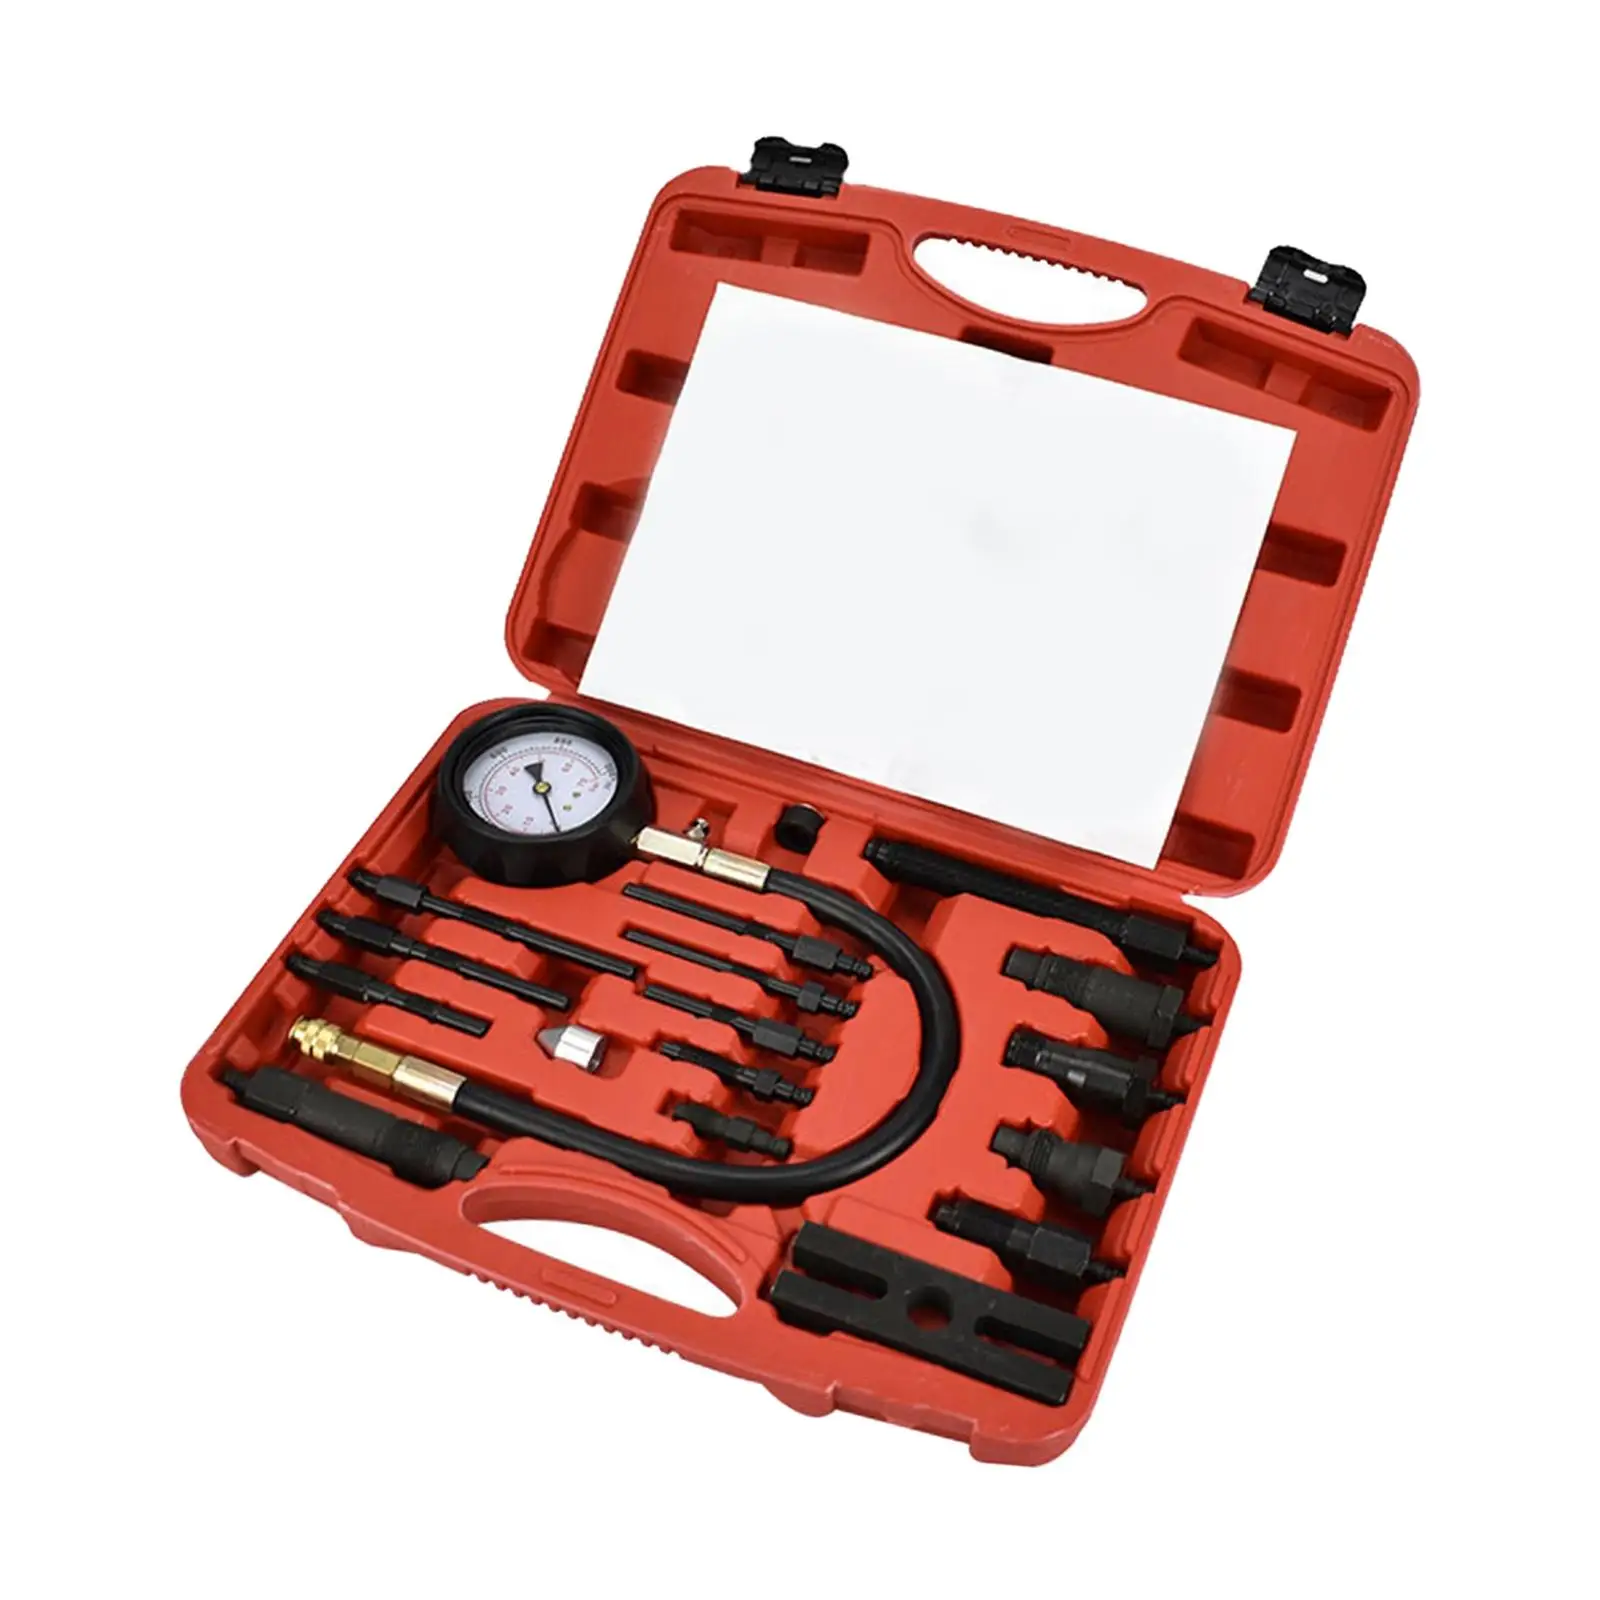 17Pcs Diesel Engine Cylinder Compression Tester Tool, Quick Connection with Carrying Case Hardware Accessories Pressure Gauge